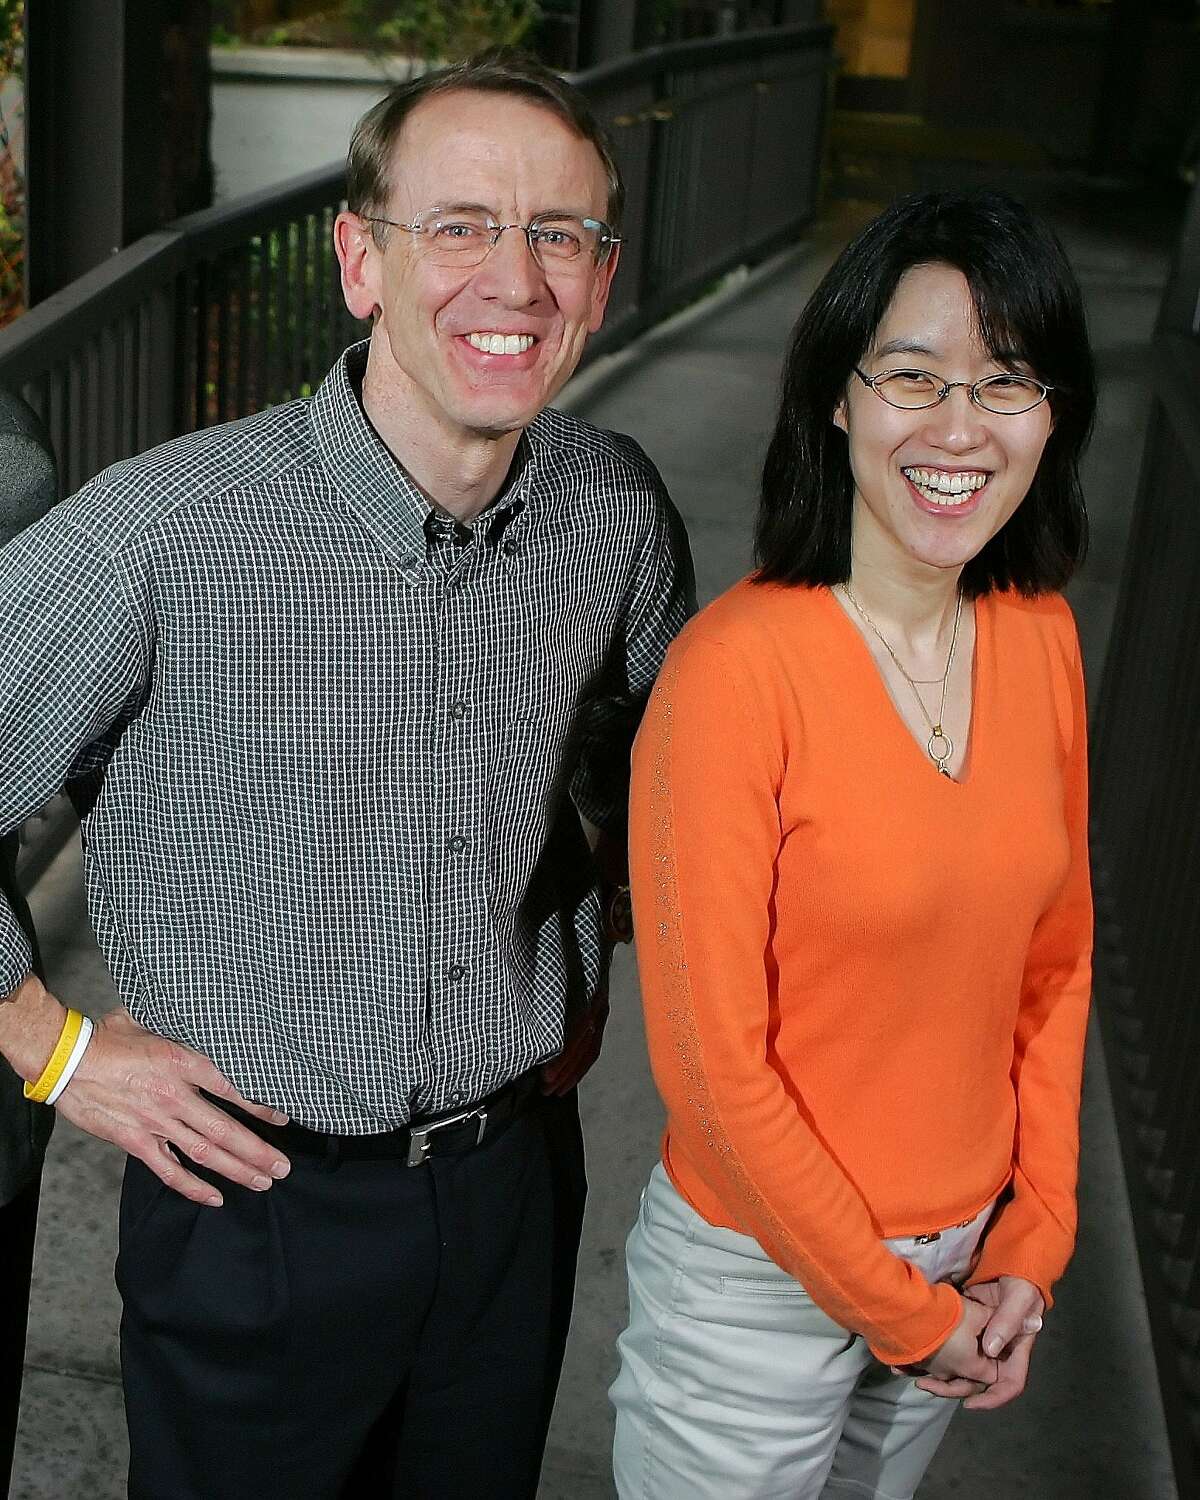 FILE - In this April 4, 2006 file photo, Kleiner Perkins Caulfield and Byers senior partner John Doerr poses for a portrait with partner Ellen Pao outside of their office in Menlo Park, Calif. A jury is set to hear opening arguments this week in a multimillion-dollar sexual harassment lawsuit filed by Pao, currently interim chief of the news and social media site Reddit, against the prominent Silicon Valley venture capital firm. (AP Photo/Marcio Jose Sanchez, File)